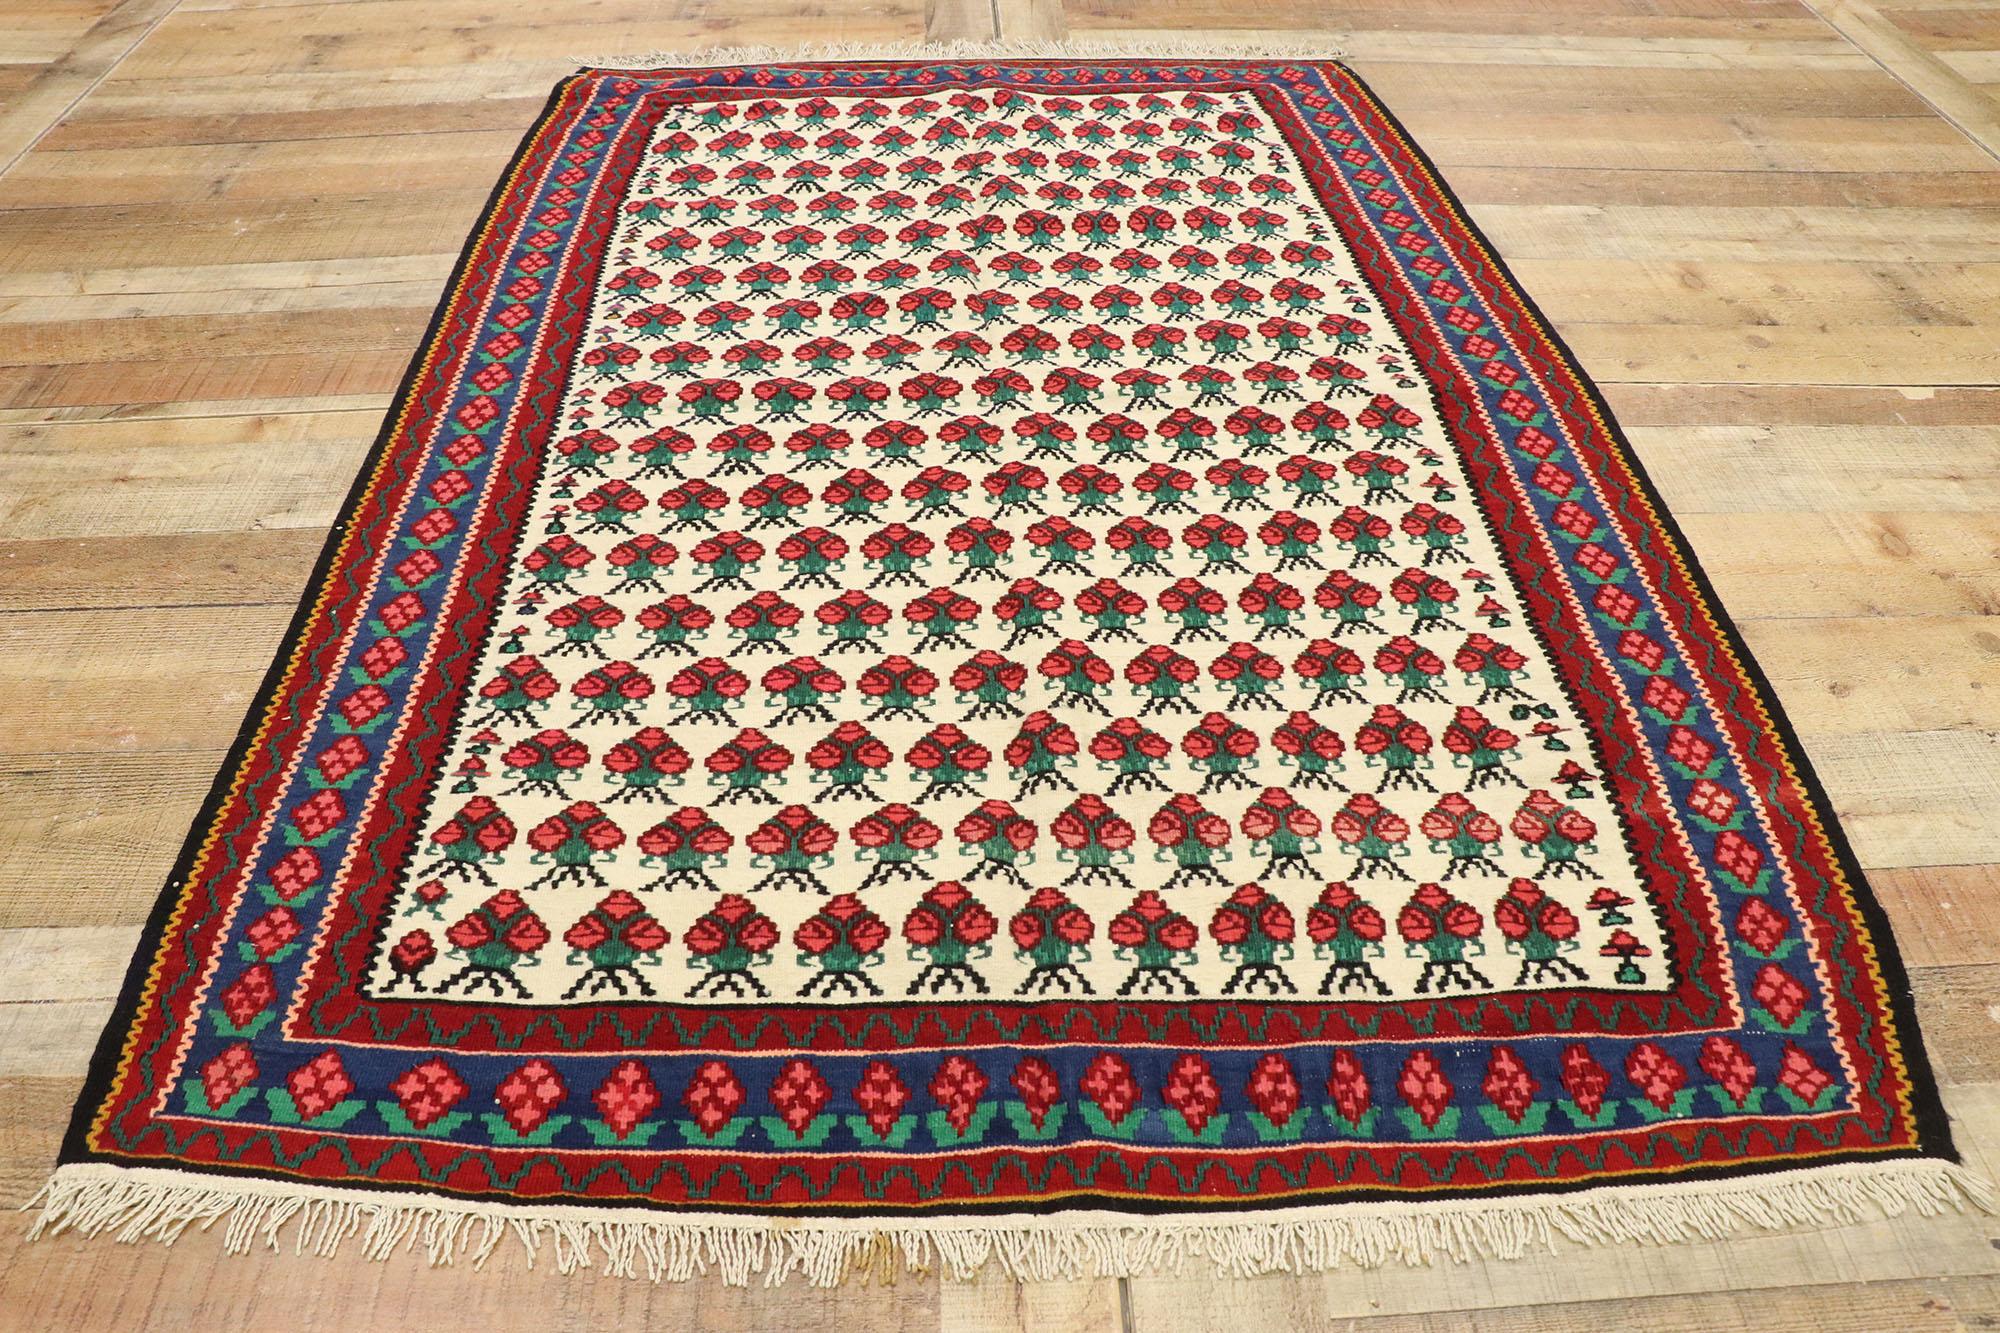 Vintage Floral Persian Kilim Rug with Americana Style In Good Condition For Sale In Dallas, TX